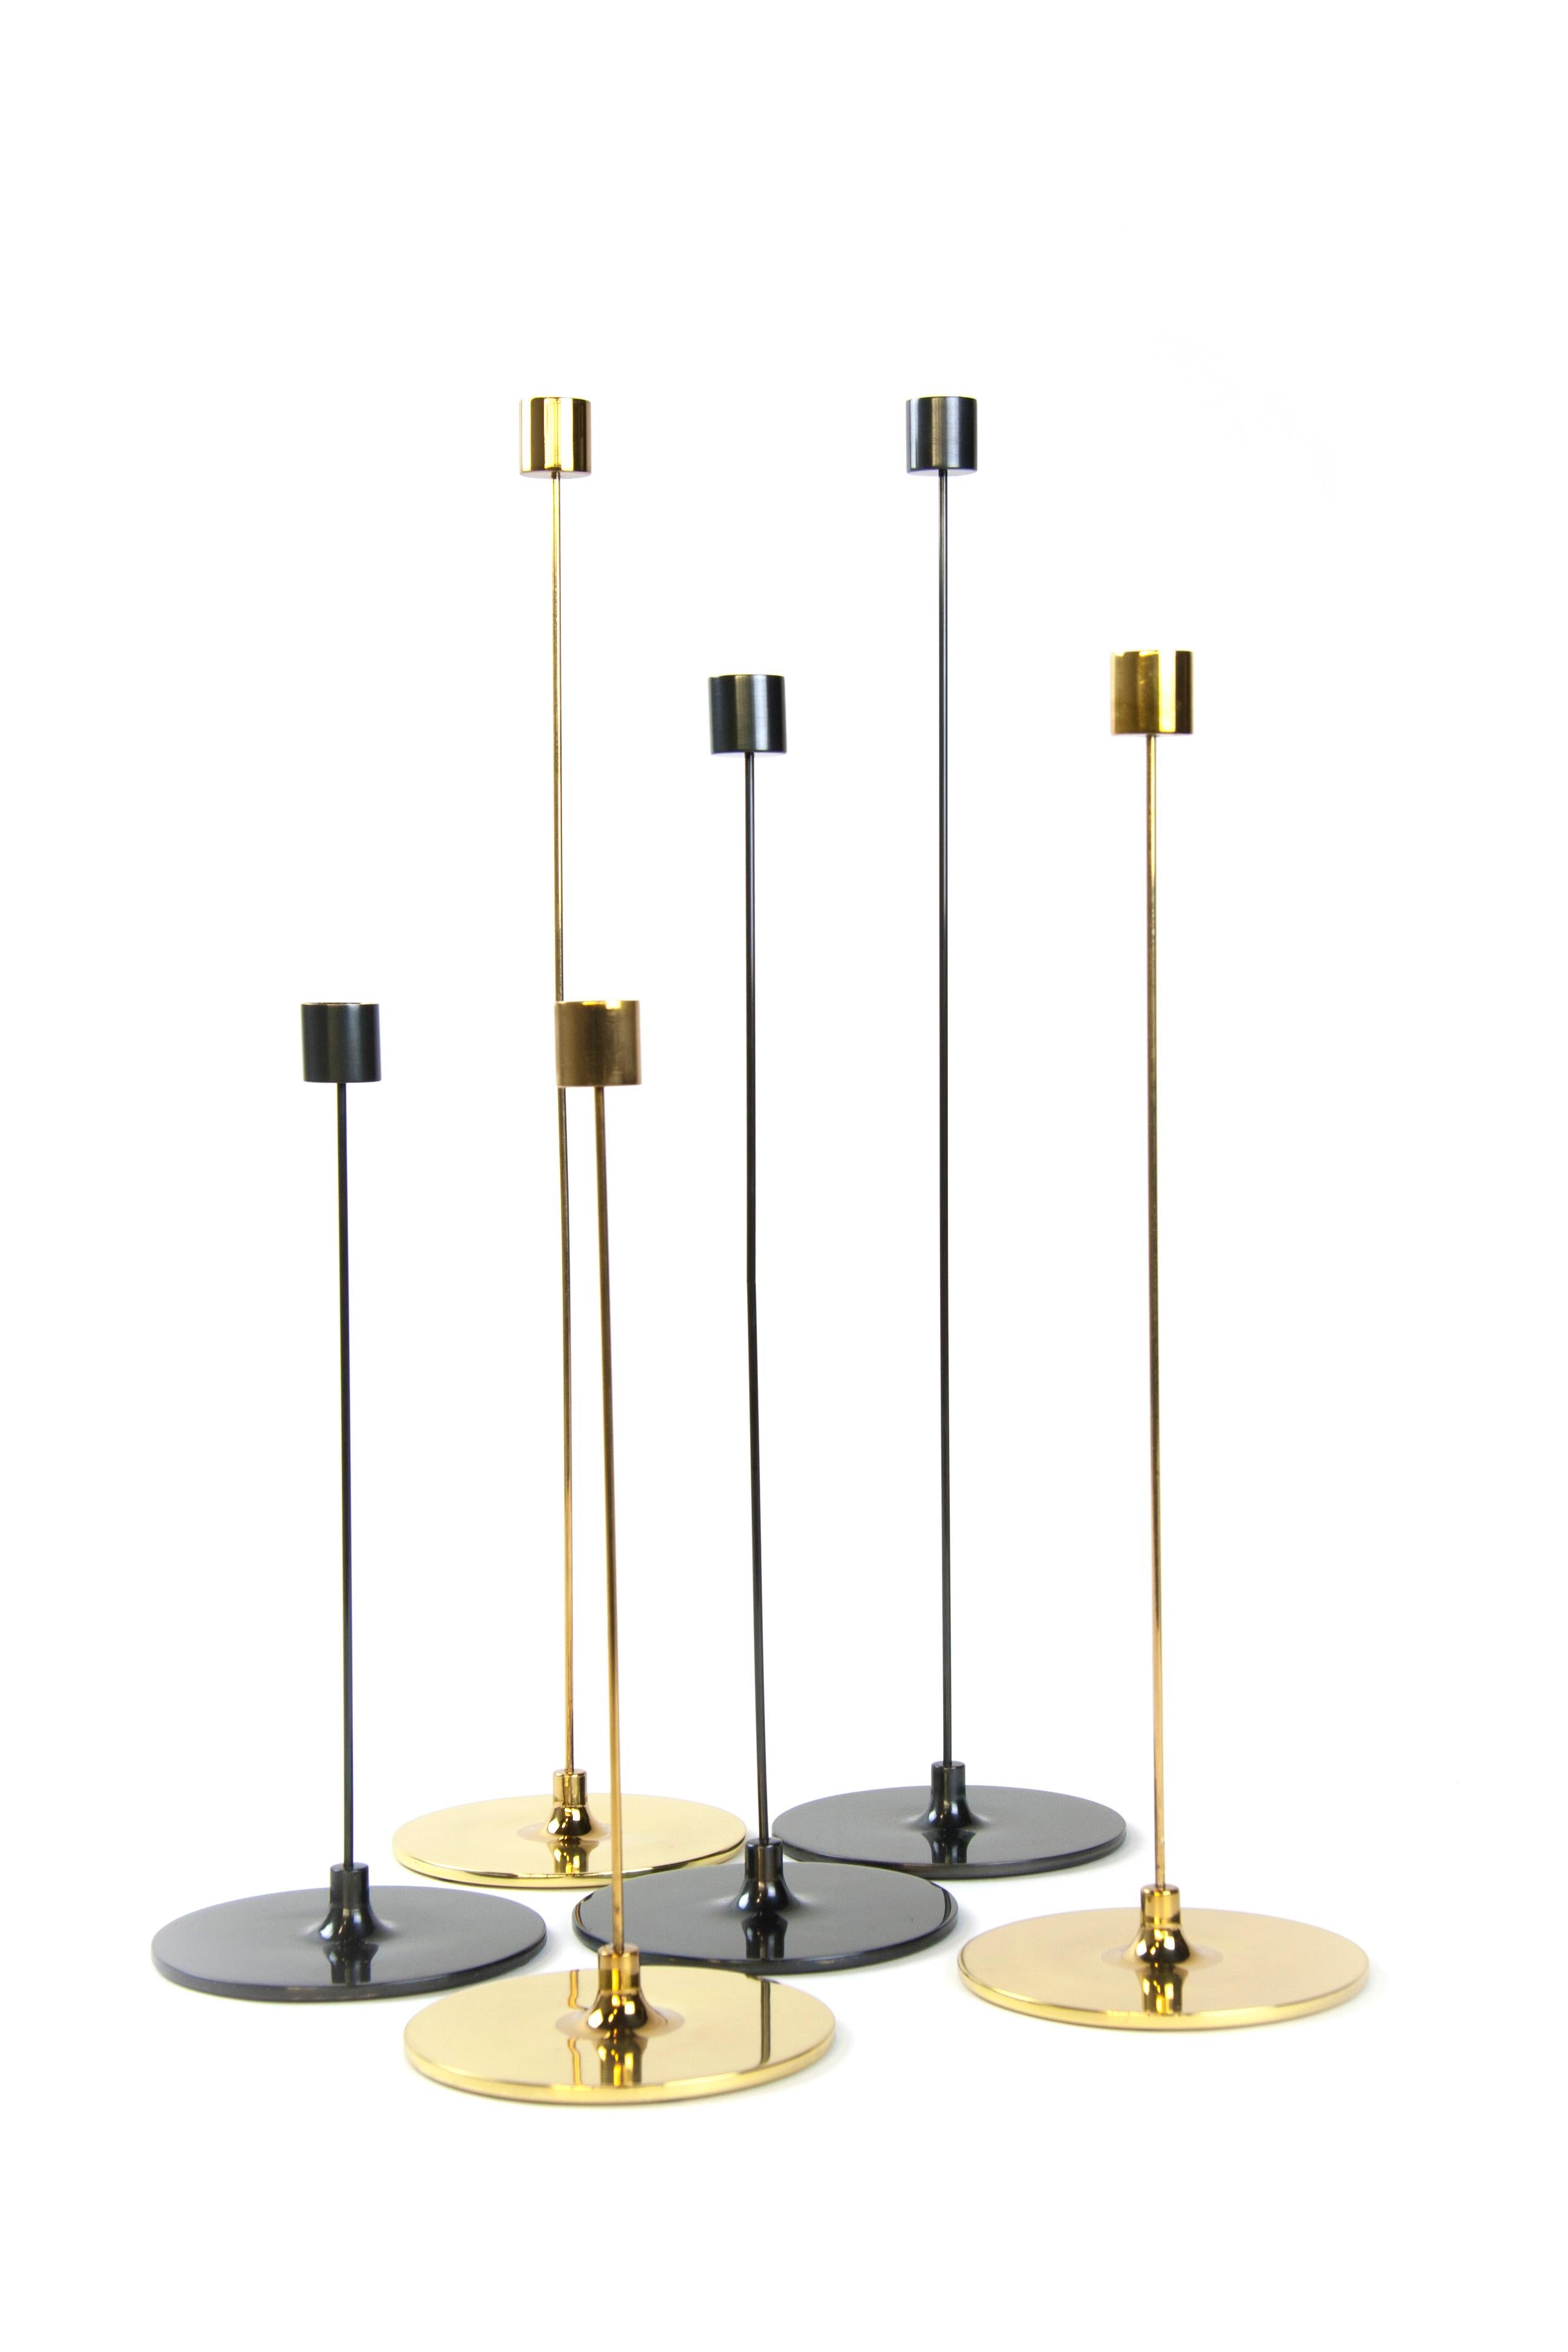 Medium pin brass candlestick by Gentner Design
Dimensions: D 12.7 x H 40.6 cm
Materials: polished tarnished brass
Available in polished tarnished brass and darkened brass.
Available in small, medium and large.

With an 12”, 16”, or 20” height, the